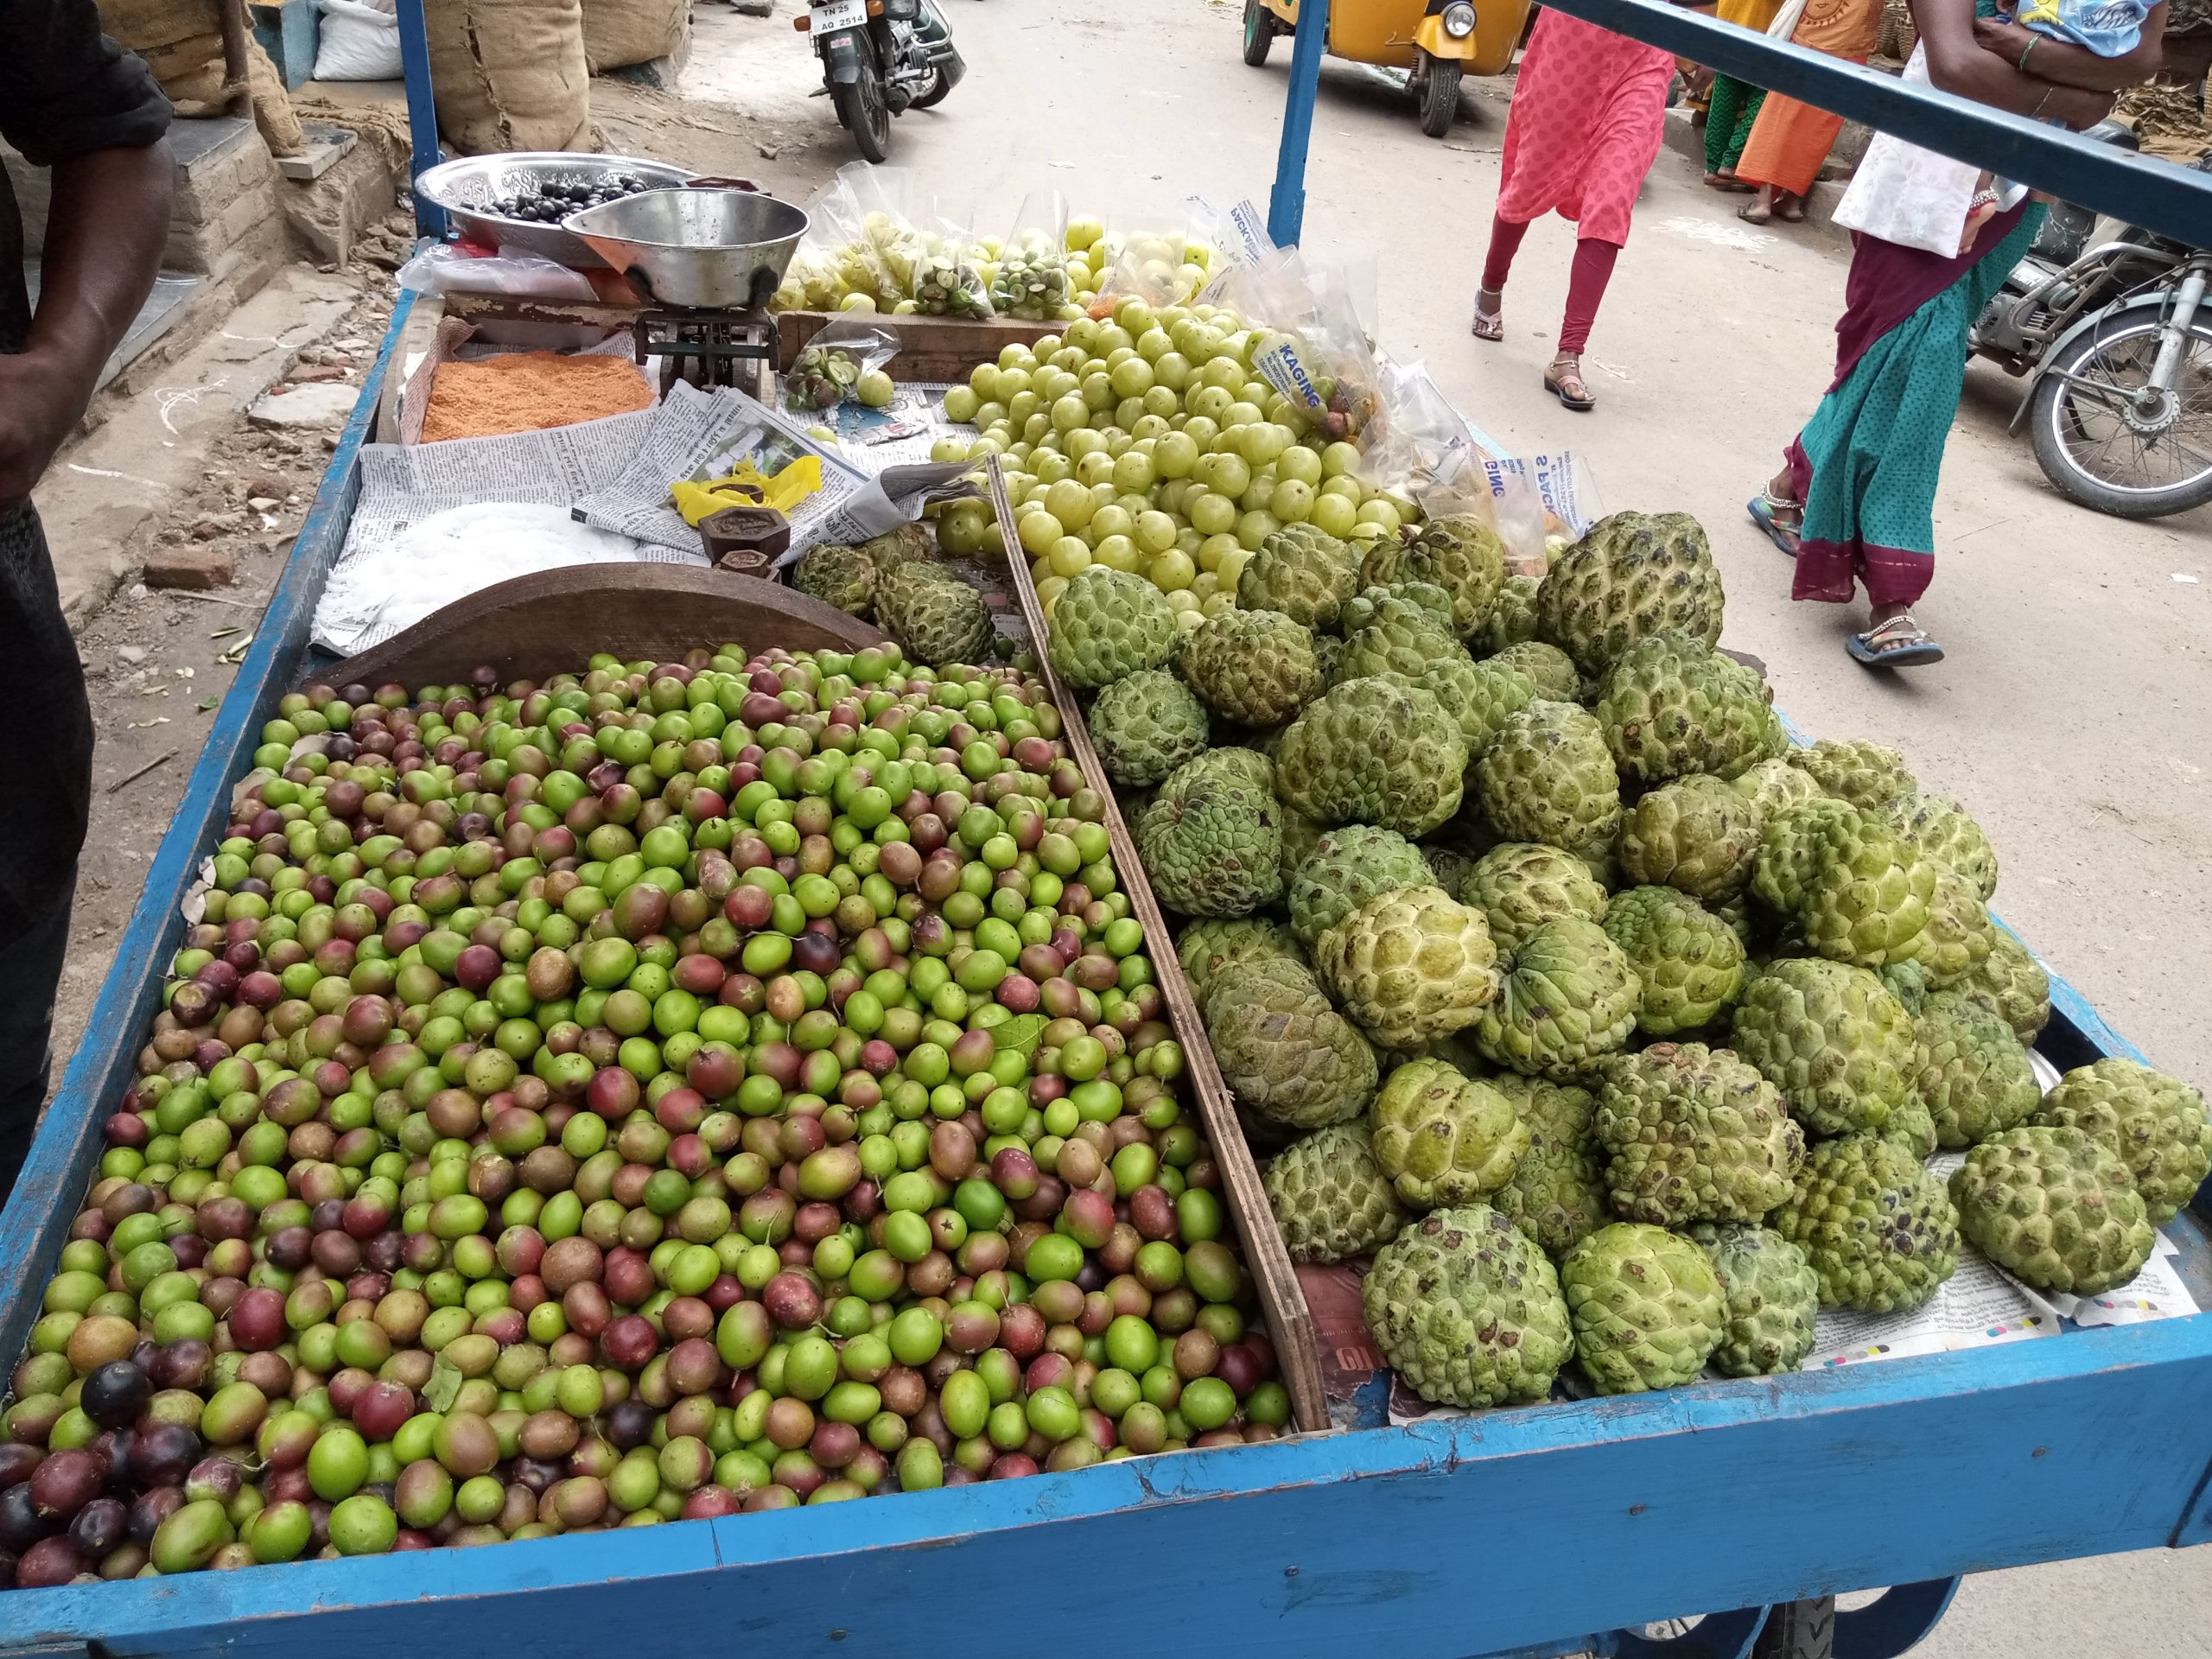 A hawker selling fruits